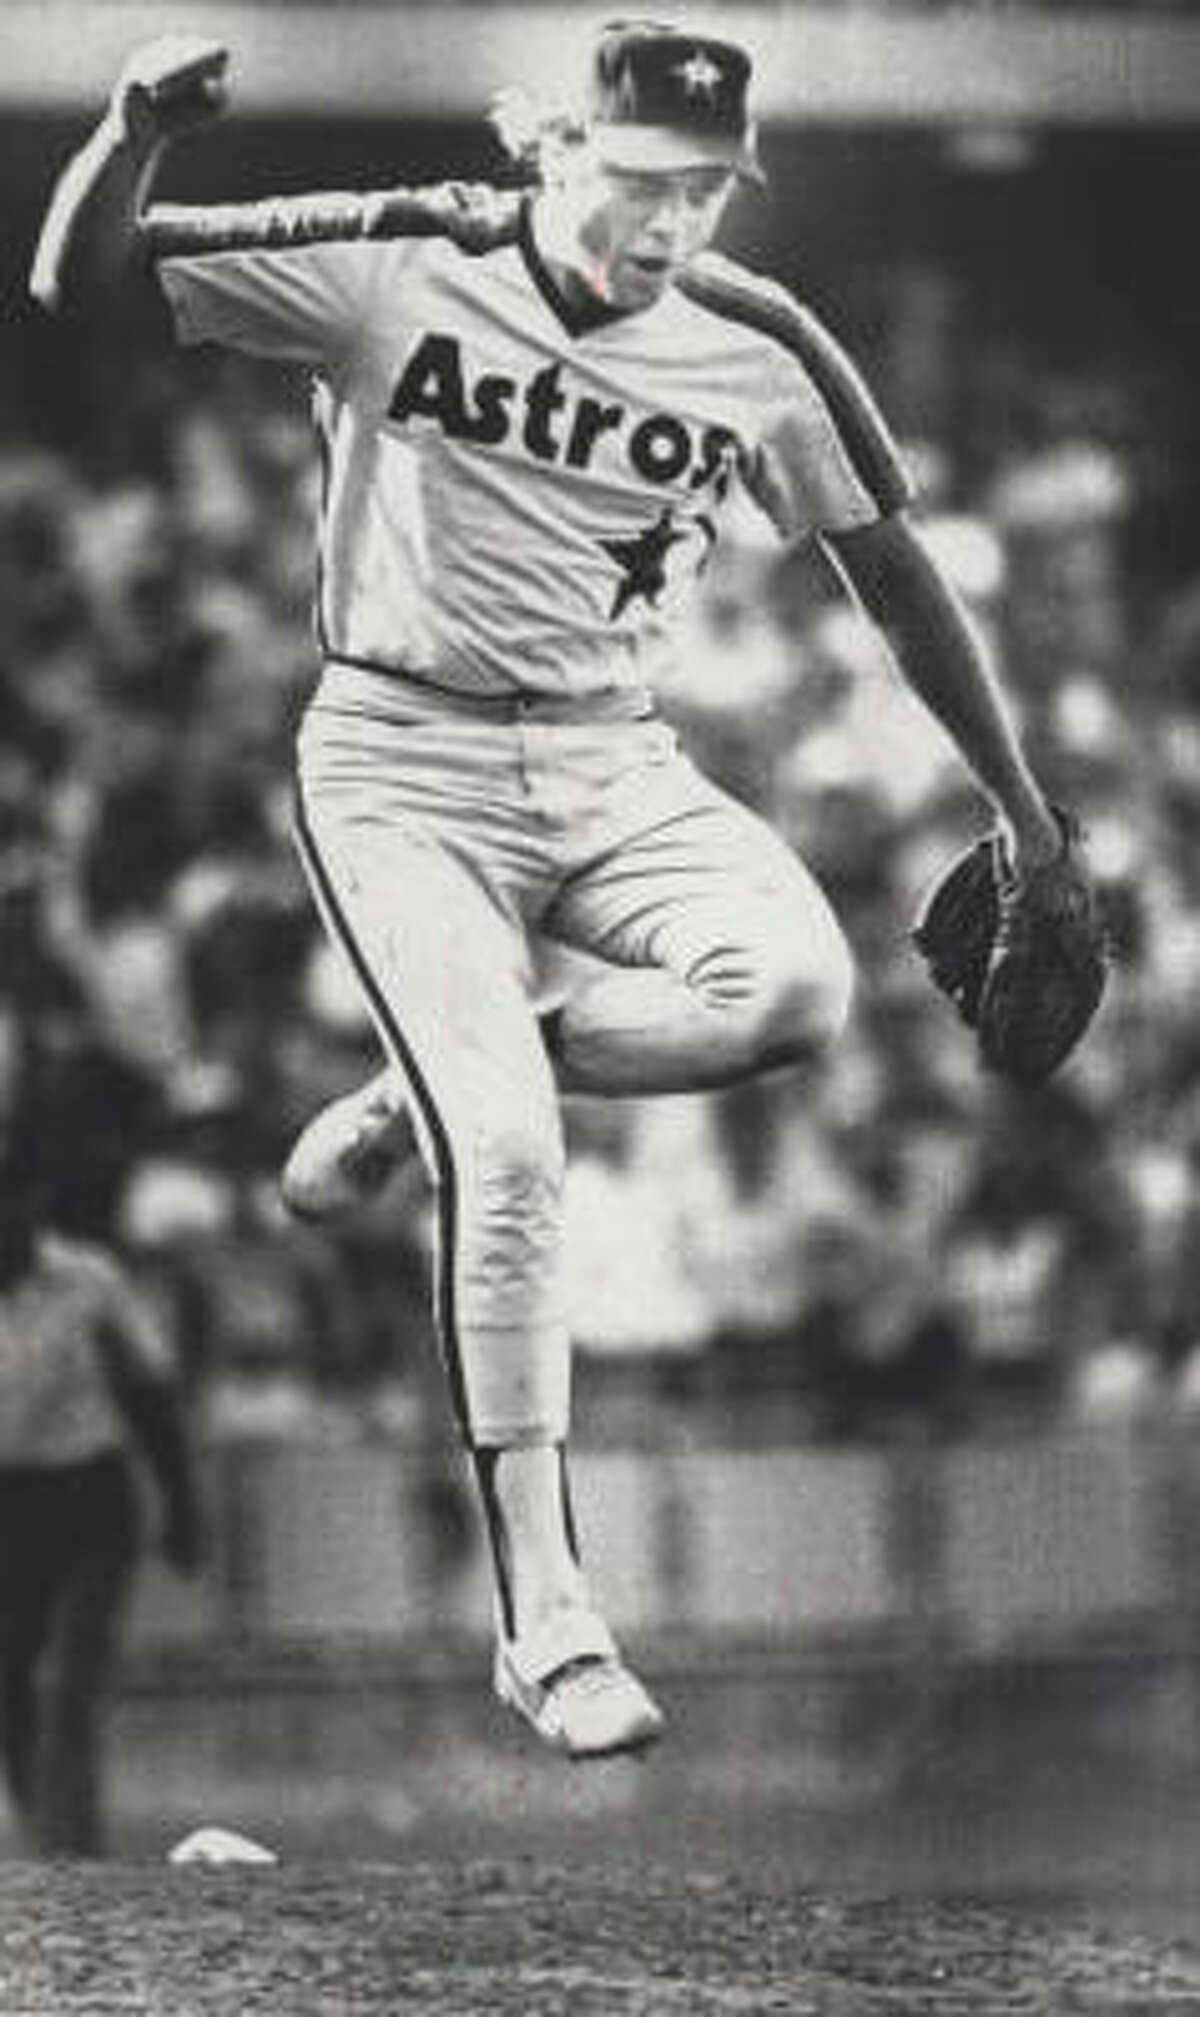 Joe Niekro, 1981 NLCS, Game 2 (Astros 1, Dodgers 0) In the second game of the 1981 NLCS, Niekro did allow seven hits and three walks. But in eight innings, he did not allow a runner to score, as the Astros went on to win the tilt in 11 innings (1-0) hits.